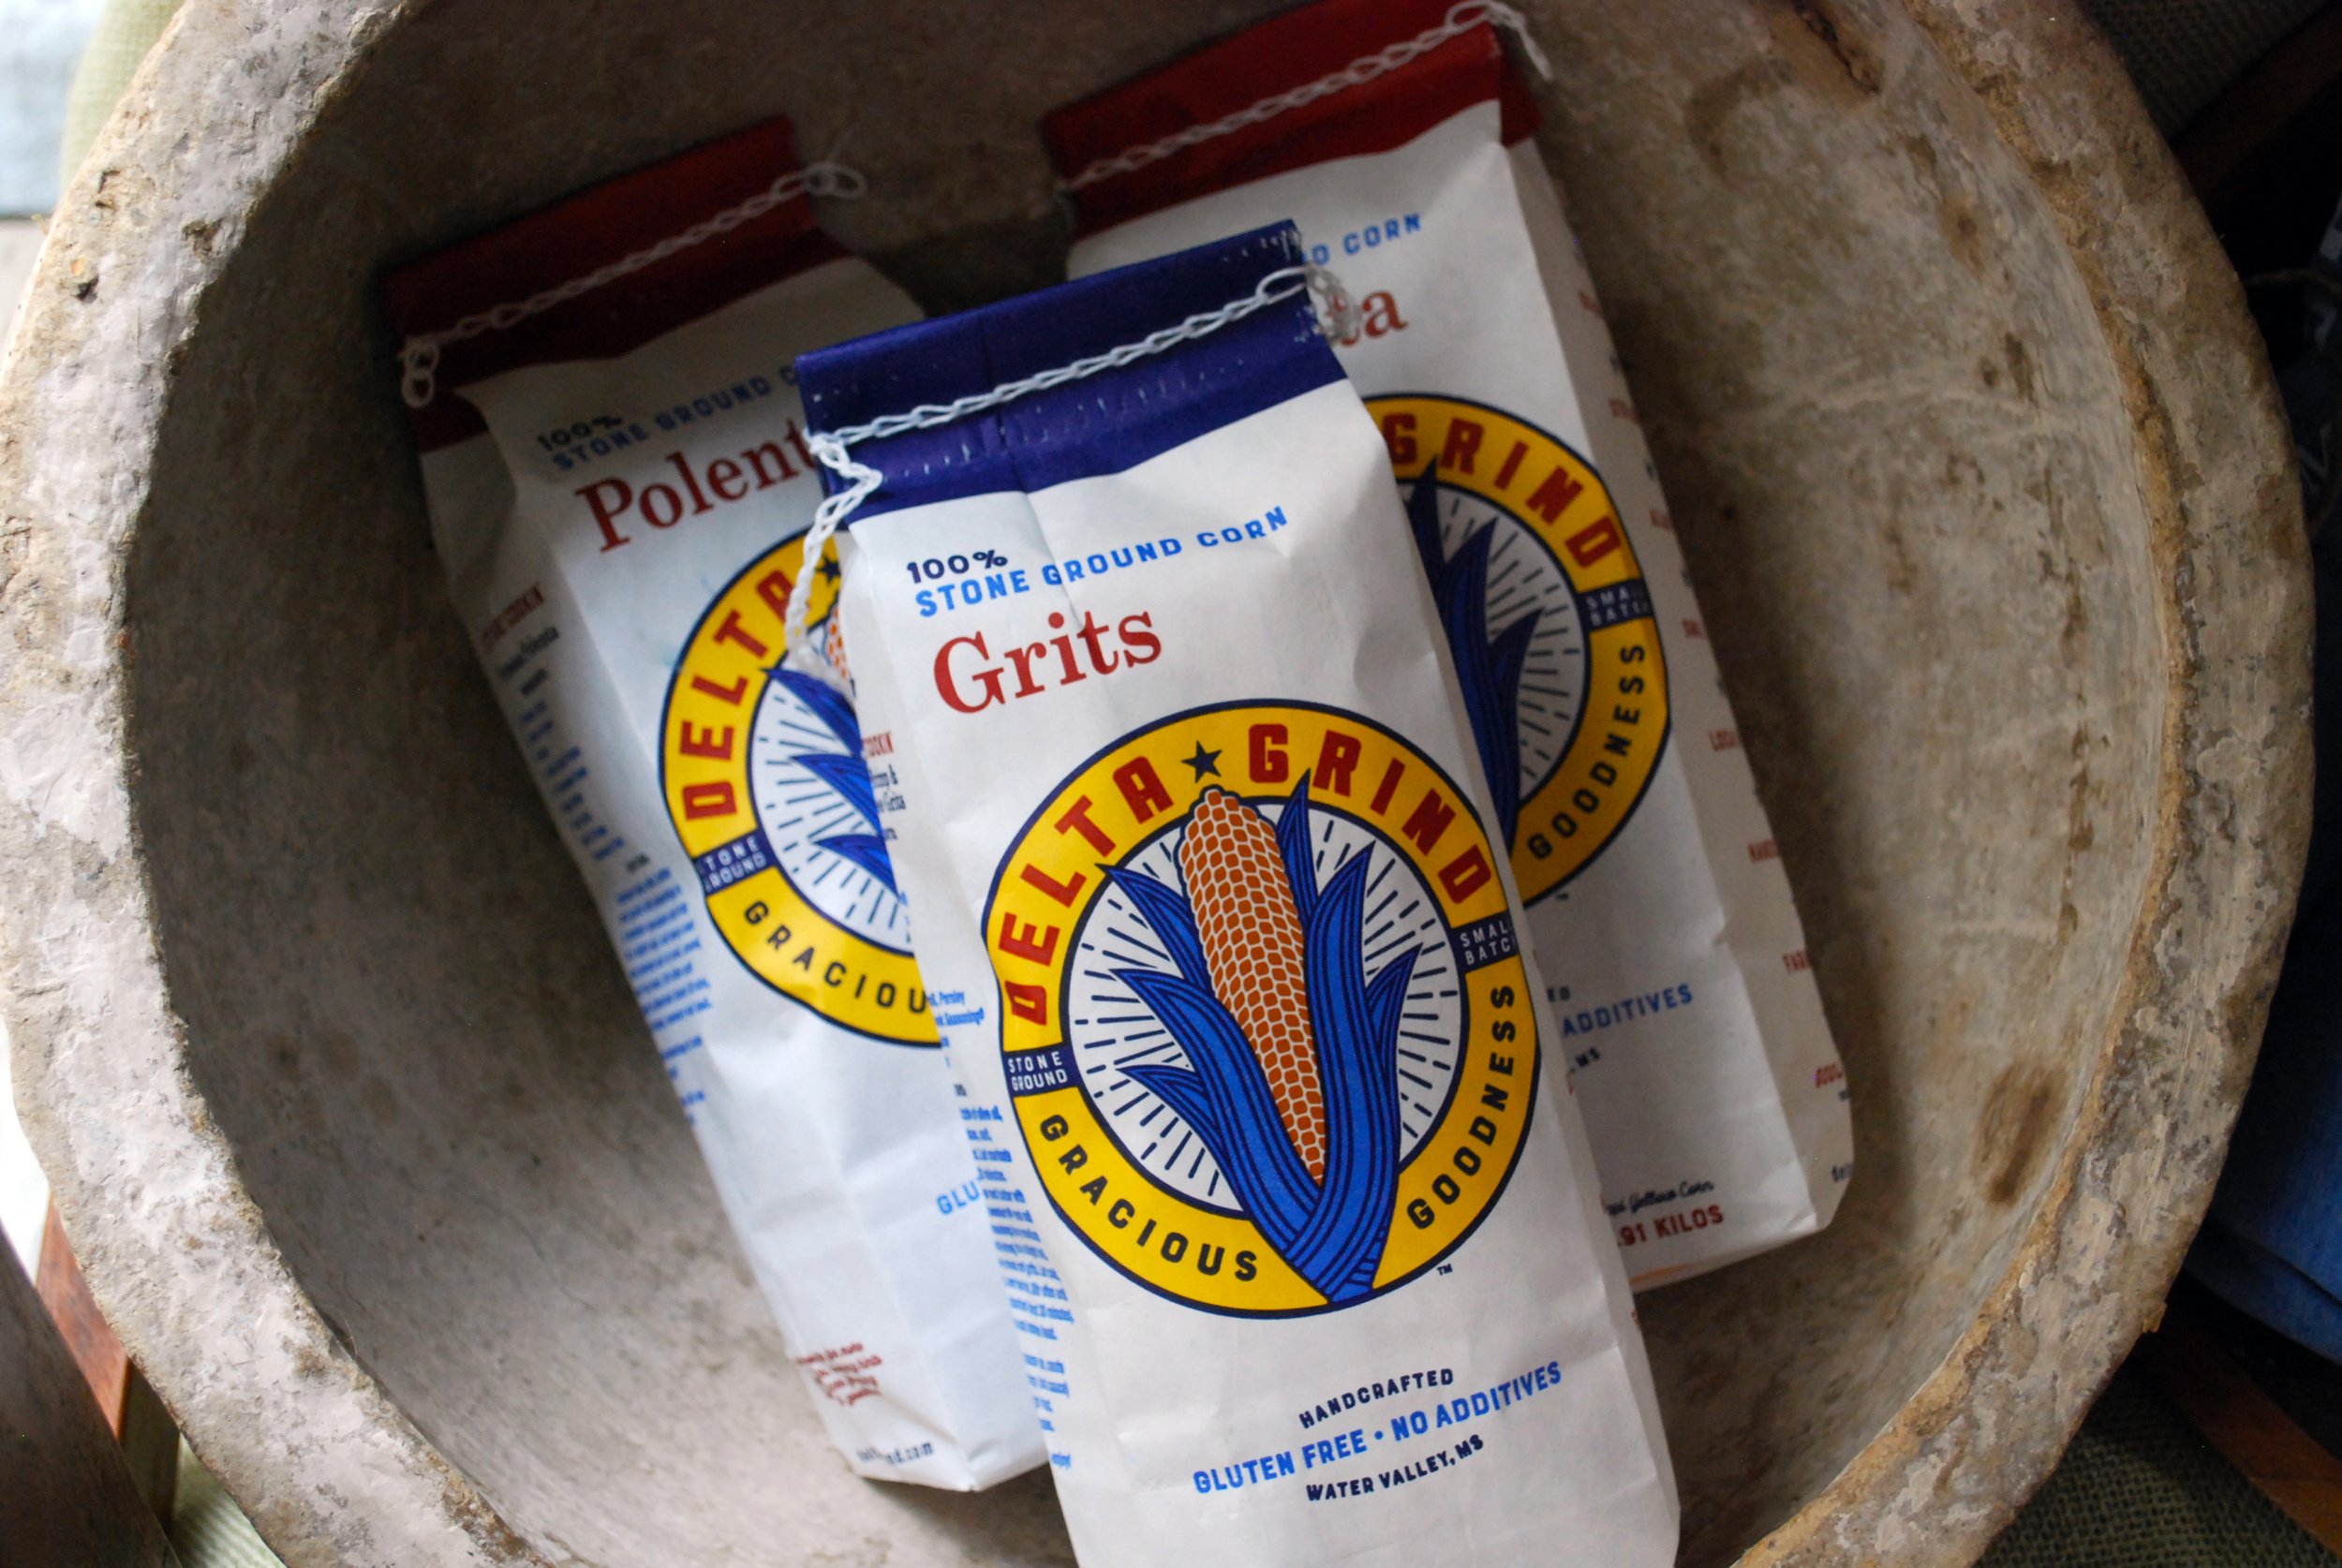  Delta Grind Grits packaging  Creative and design by Chuck Mitchell  for Delta Grind Stone Ground Products, LLC 